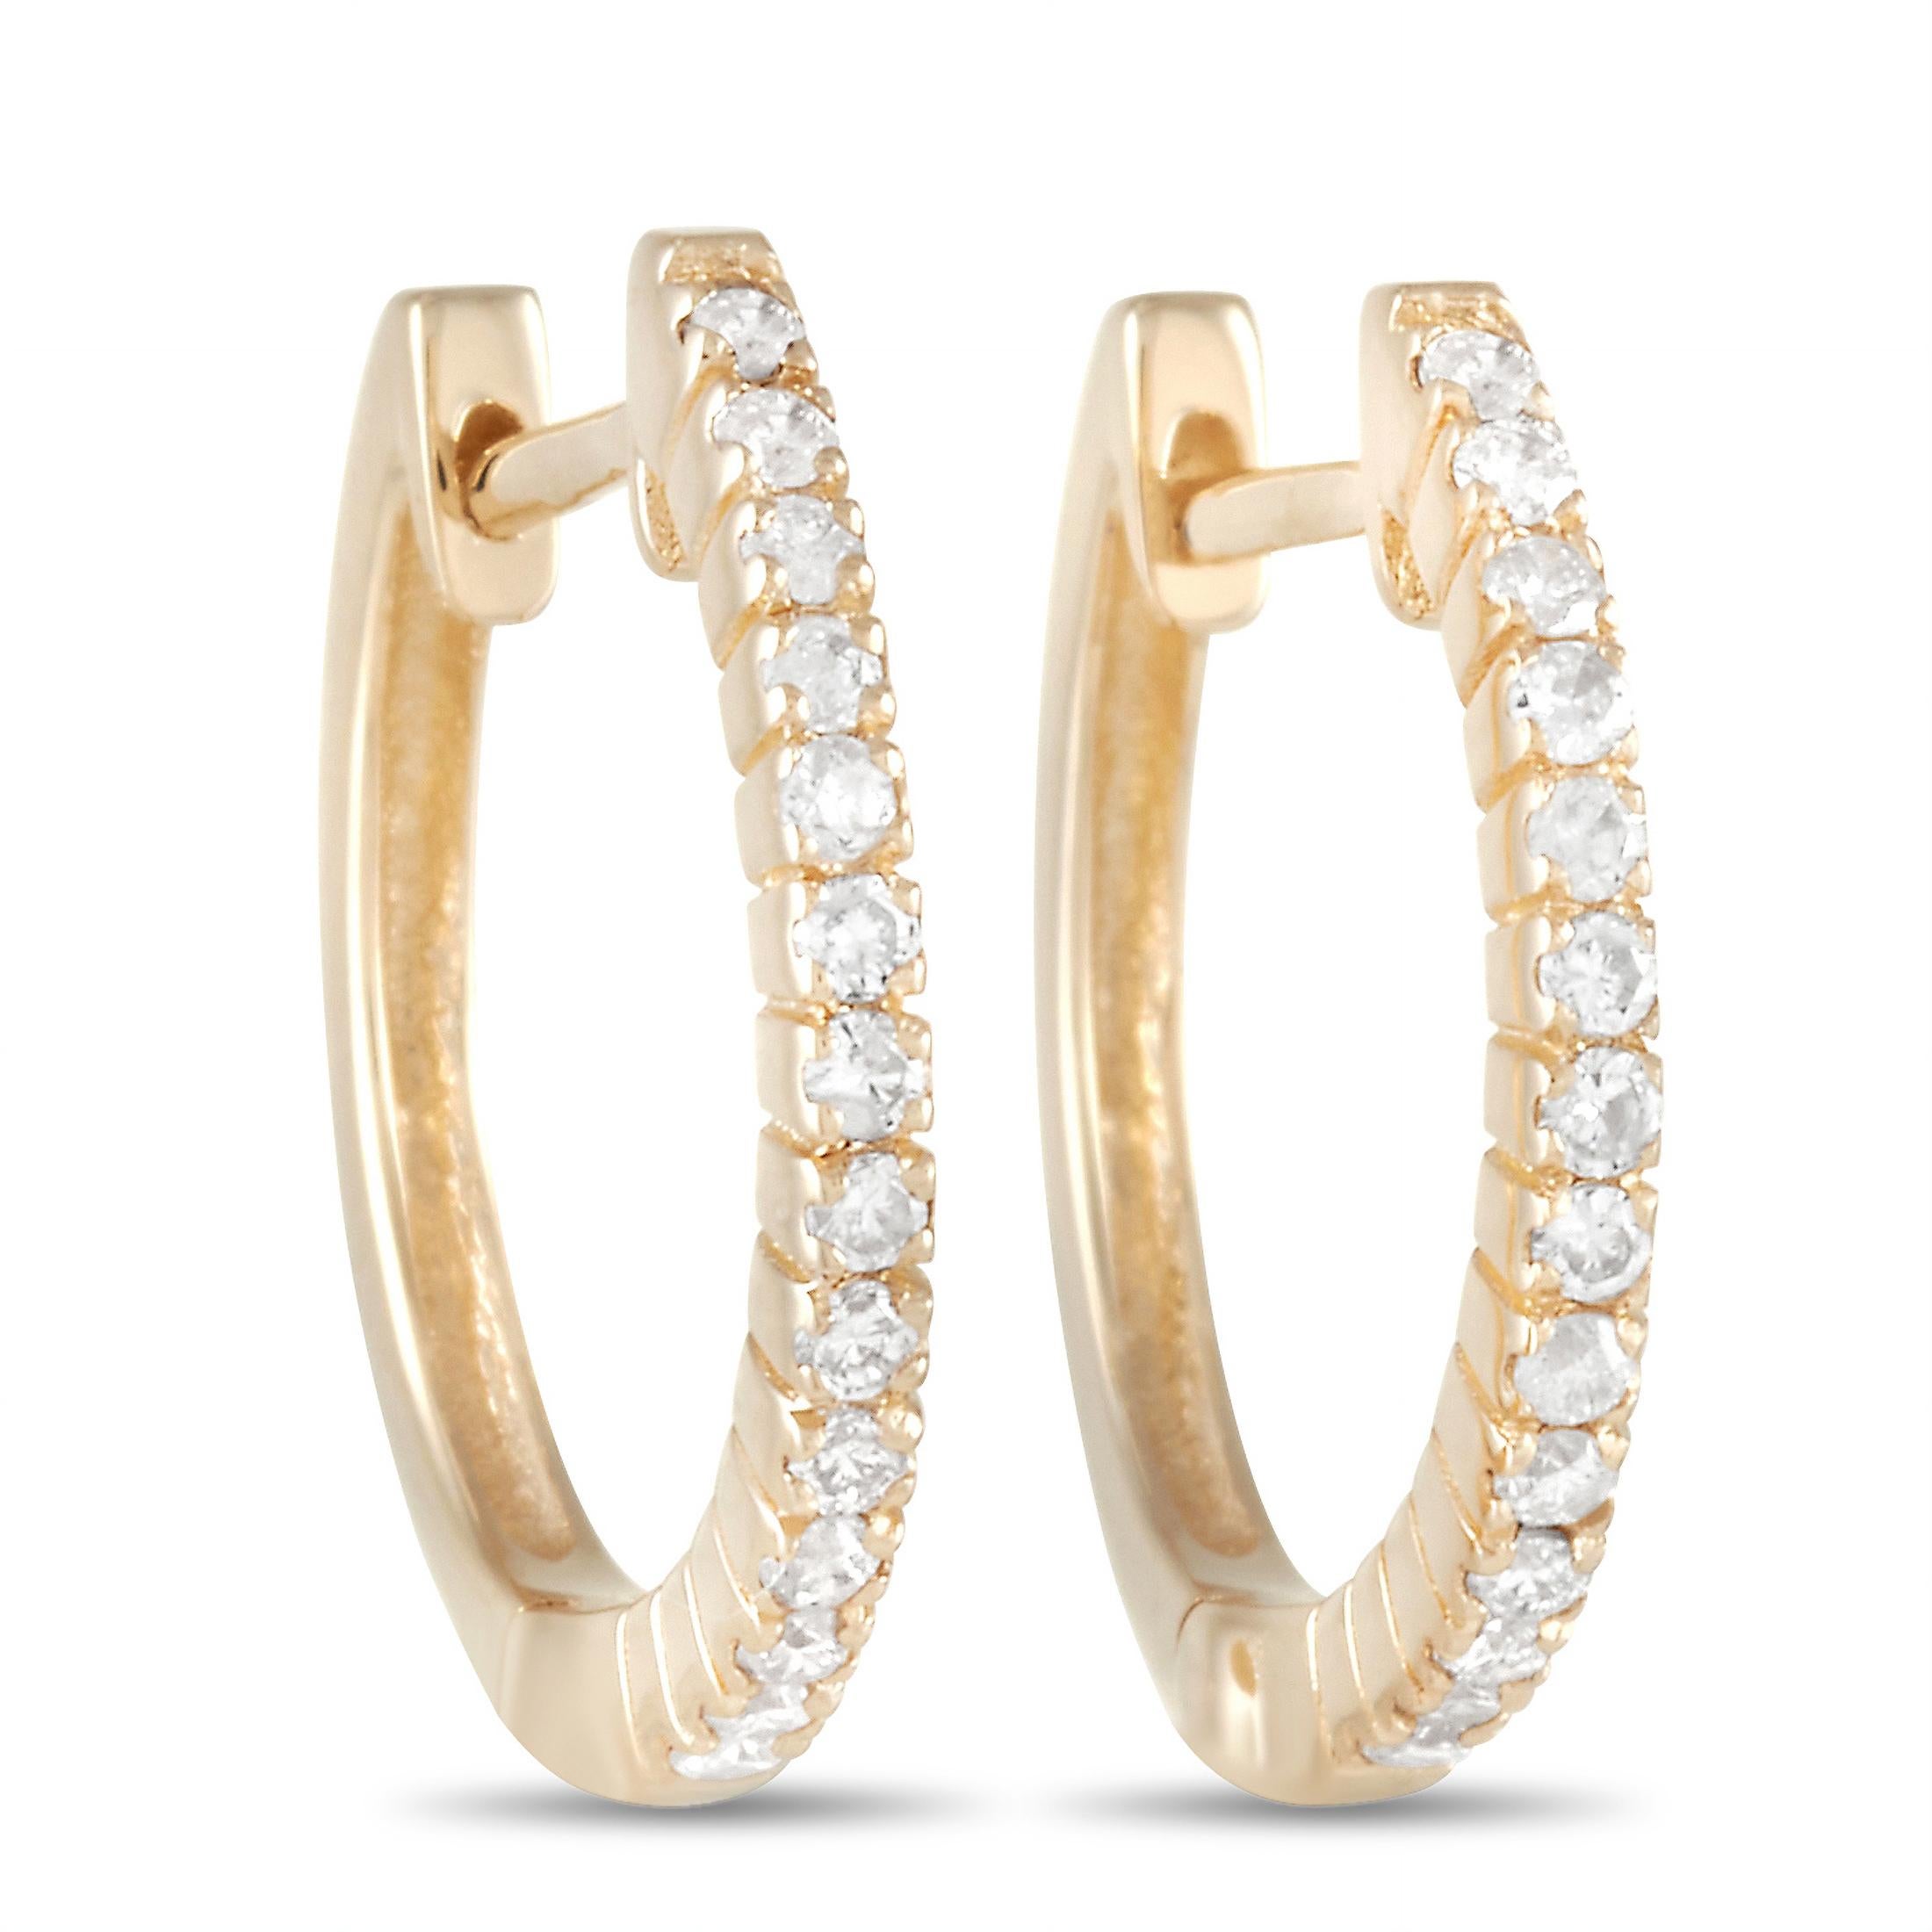 LB Exclusive 14k Yellow Gold 0.27 Carat Diamond Hoop Earrings In New Condition For Sale In Southampton, PA